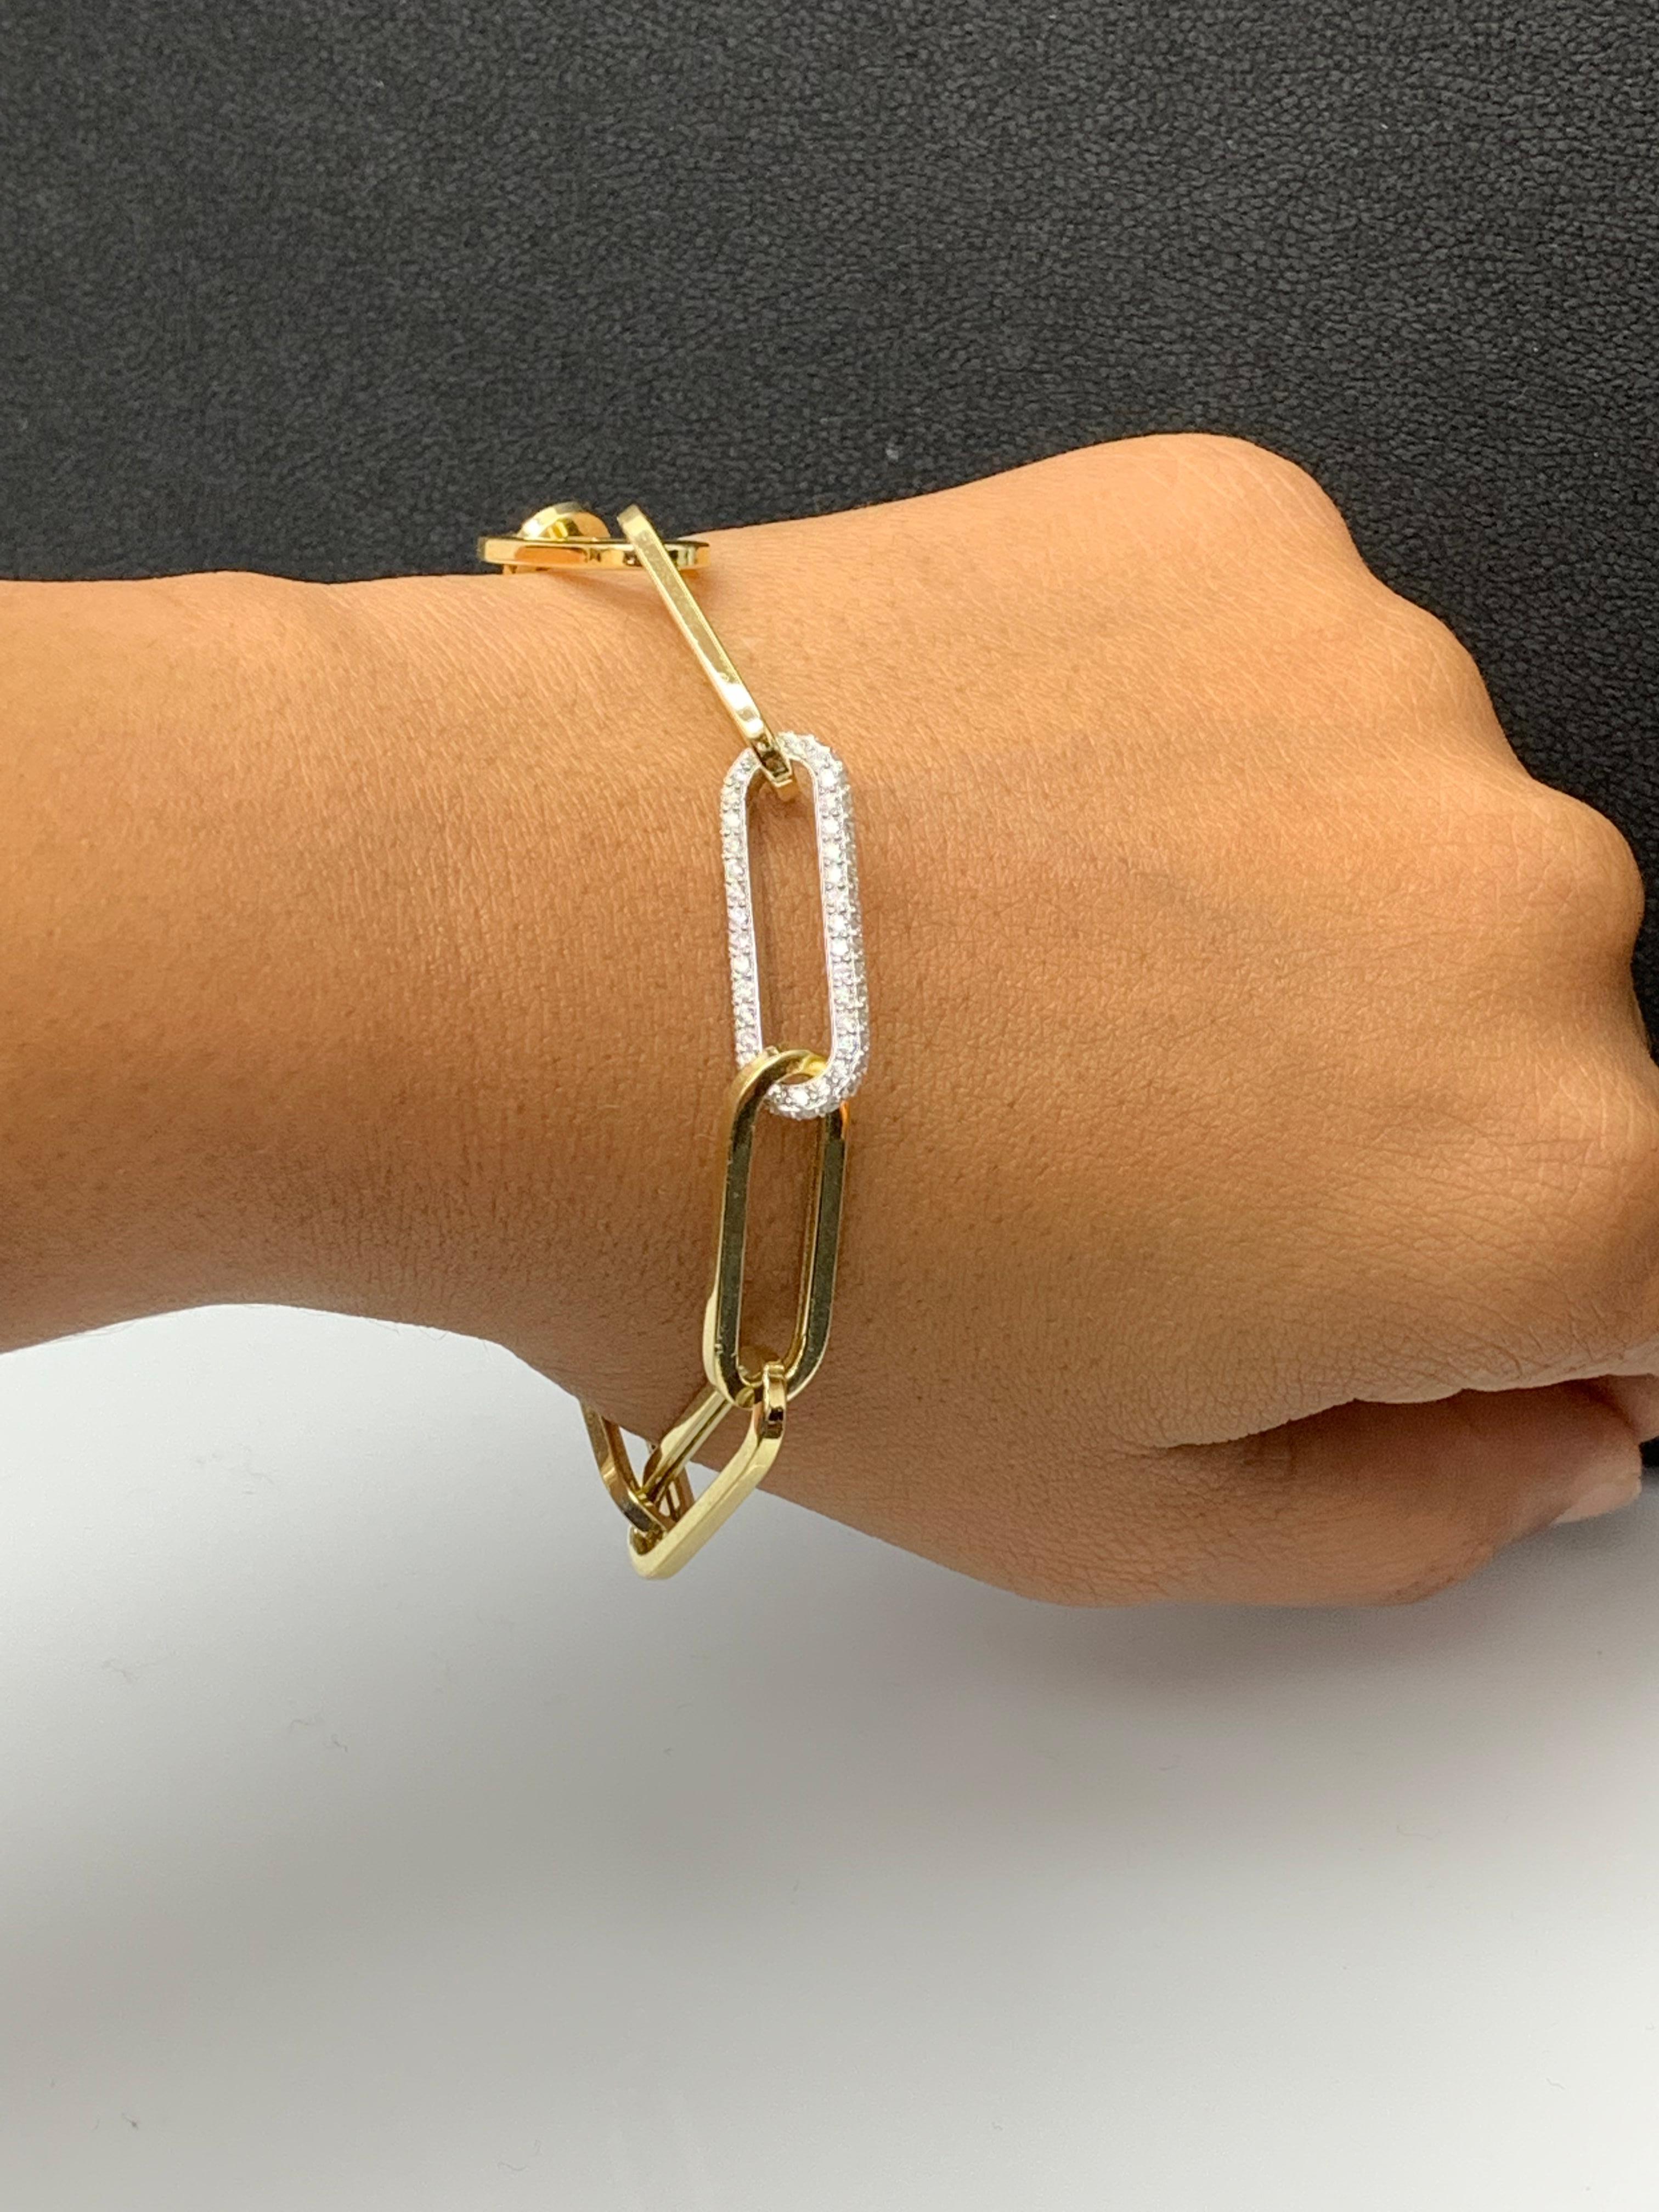 Brilliant Cut 0.93 Carat Diamond Paper Clip Bracelet in 14K Yellow Gold and White Gold For Sale